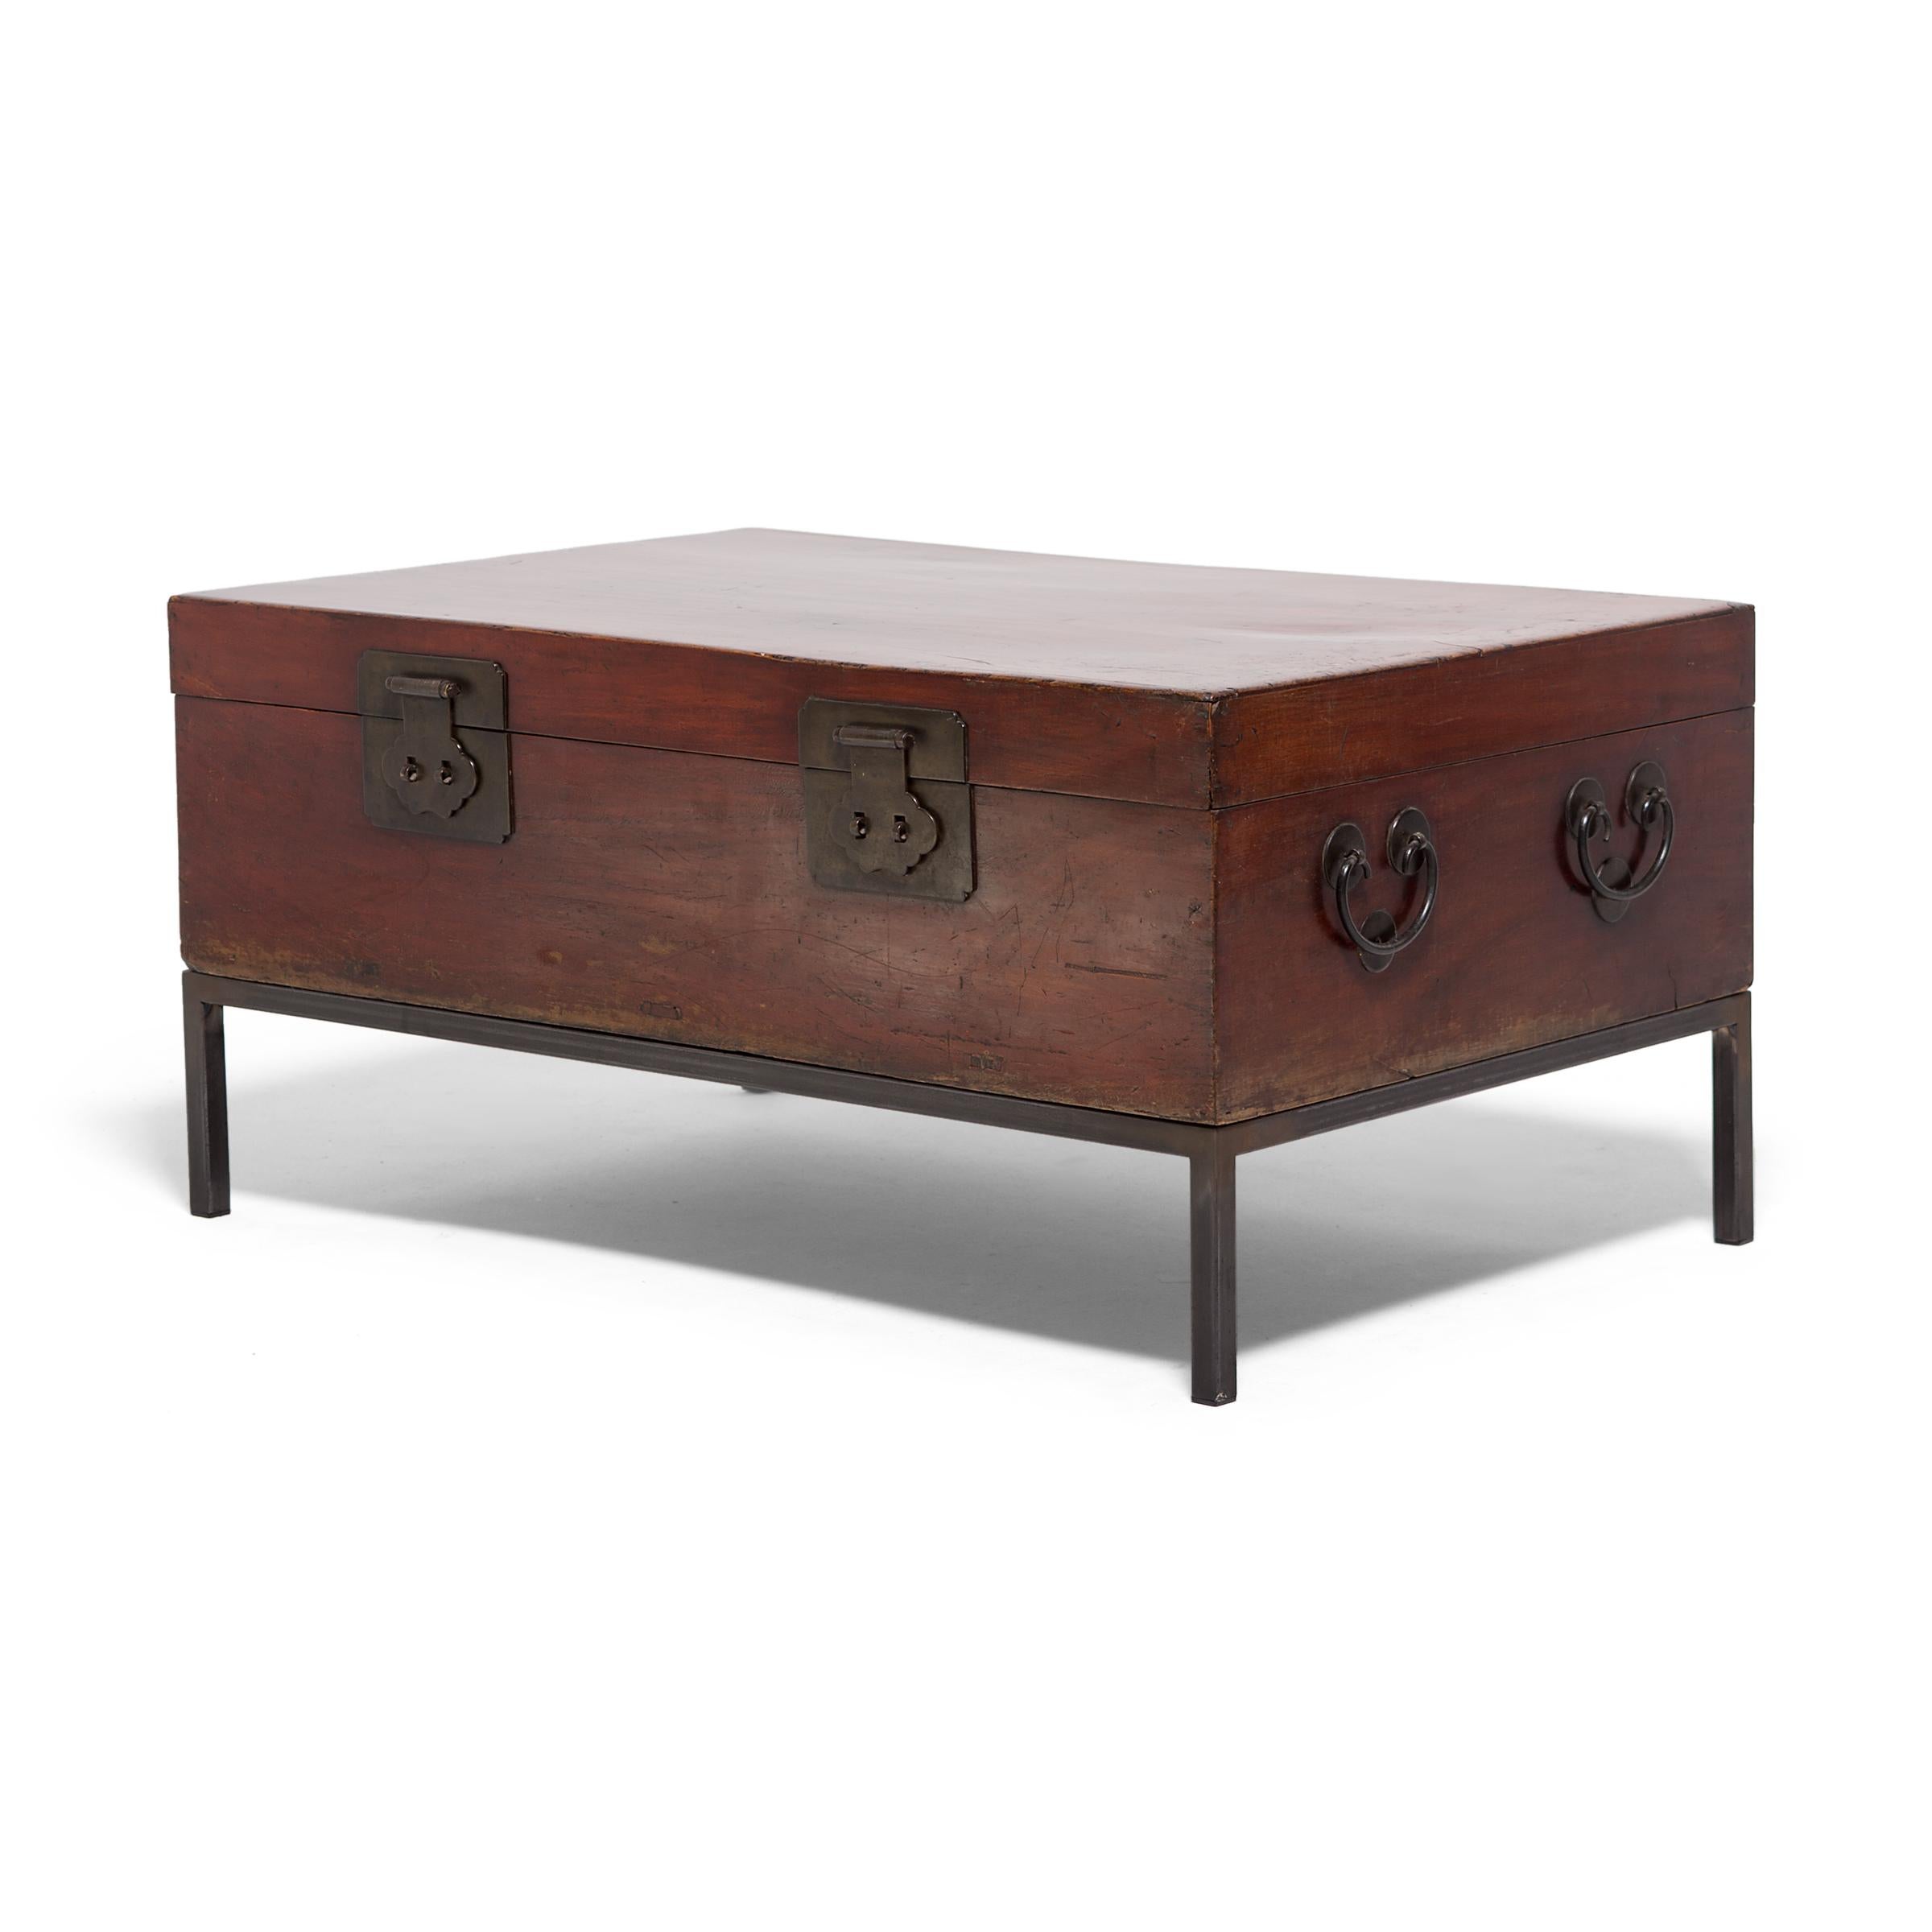 Cloud-shaped latches adorn this camphor wood trunk from the turn of the century. Camphor is prized not only for its beautiful grain and rich color, but also for its aromatic nature and its remarkable ability to keep its contents, such as knits or